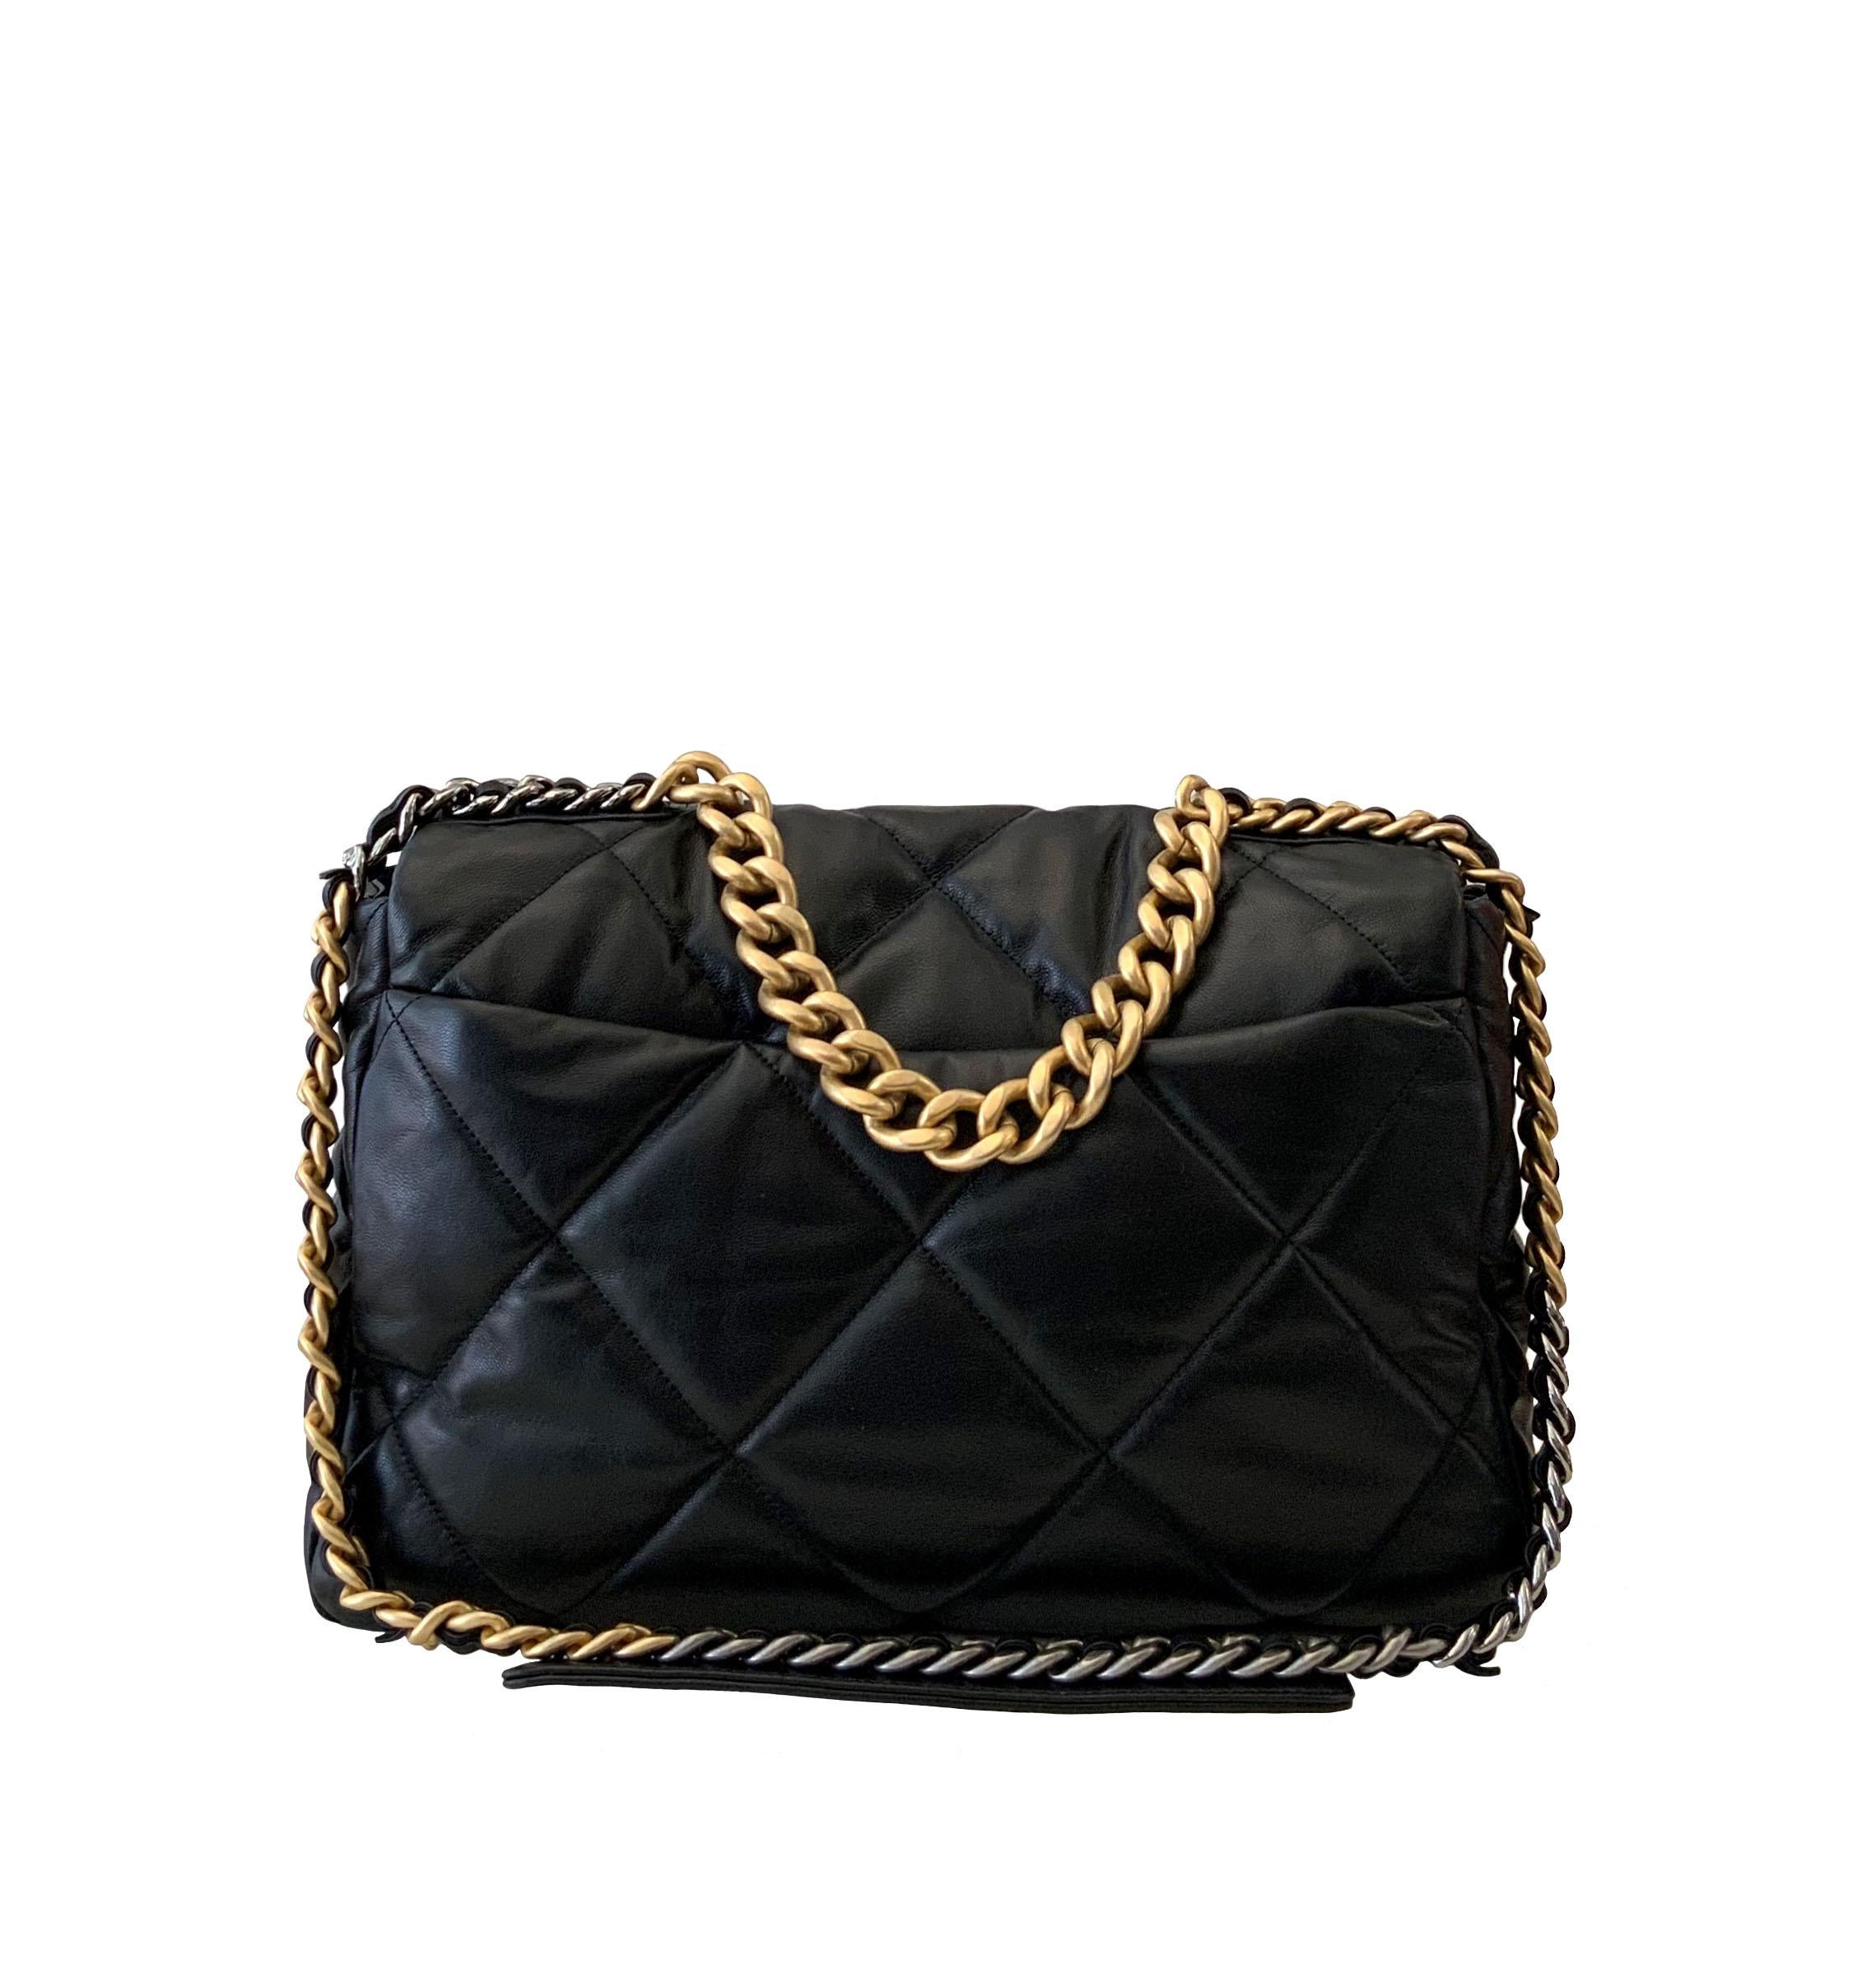 This pre-owned Chanel 19 Maxi Flap bag is crafted in smooth lambskin leather with an exaggerated diamond quilting.
It is finished with constrasting hardware in both gold and ruthenium and features a CC twist -lock and a small chain handle to be